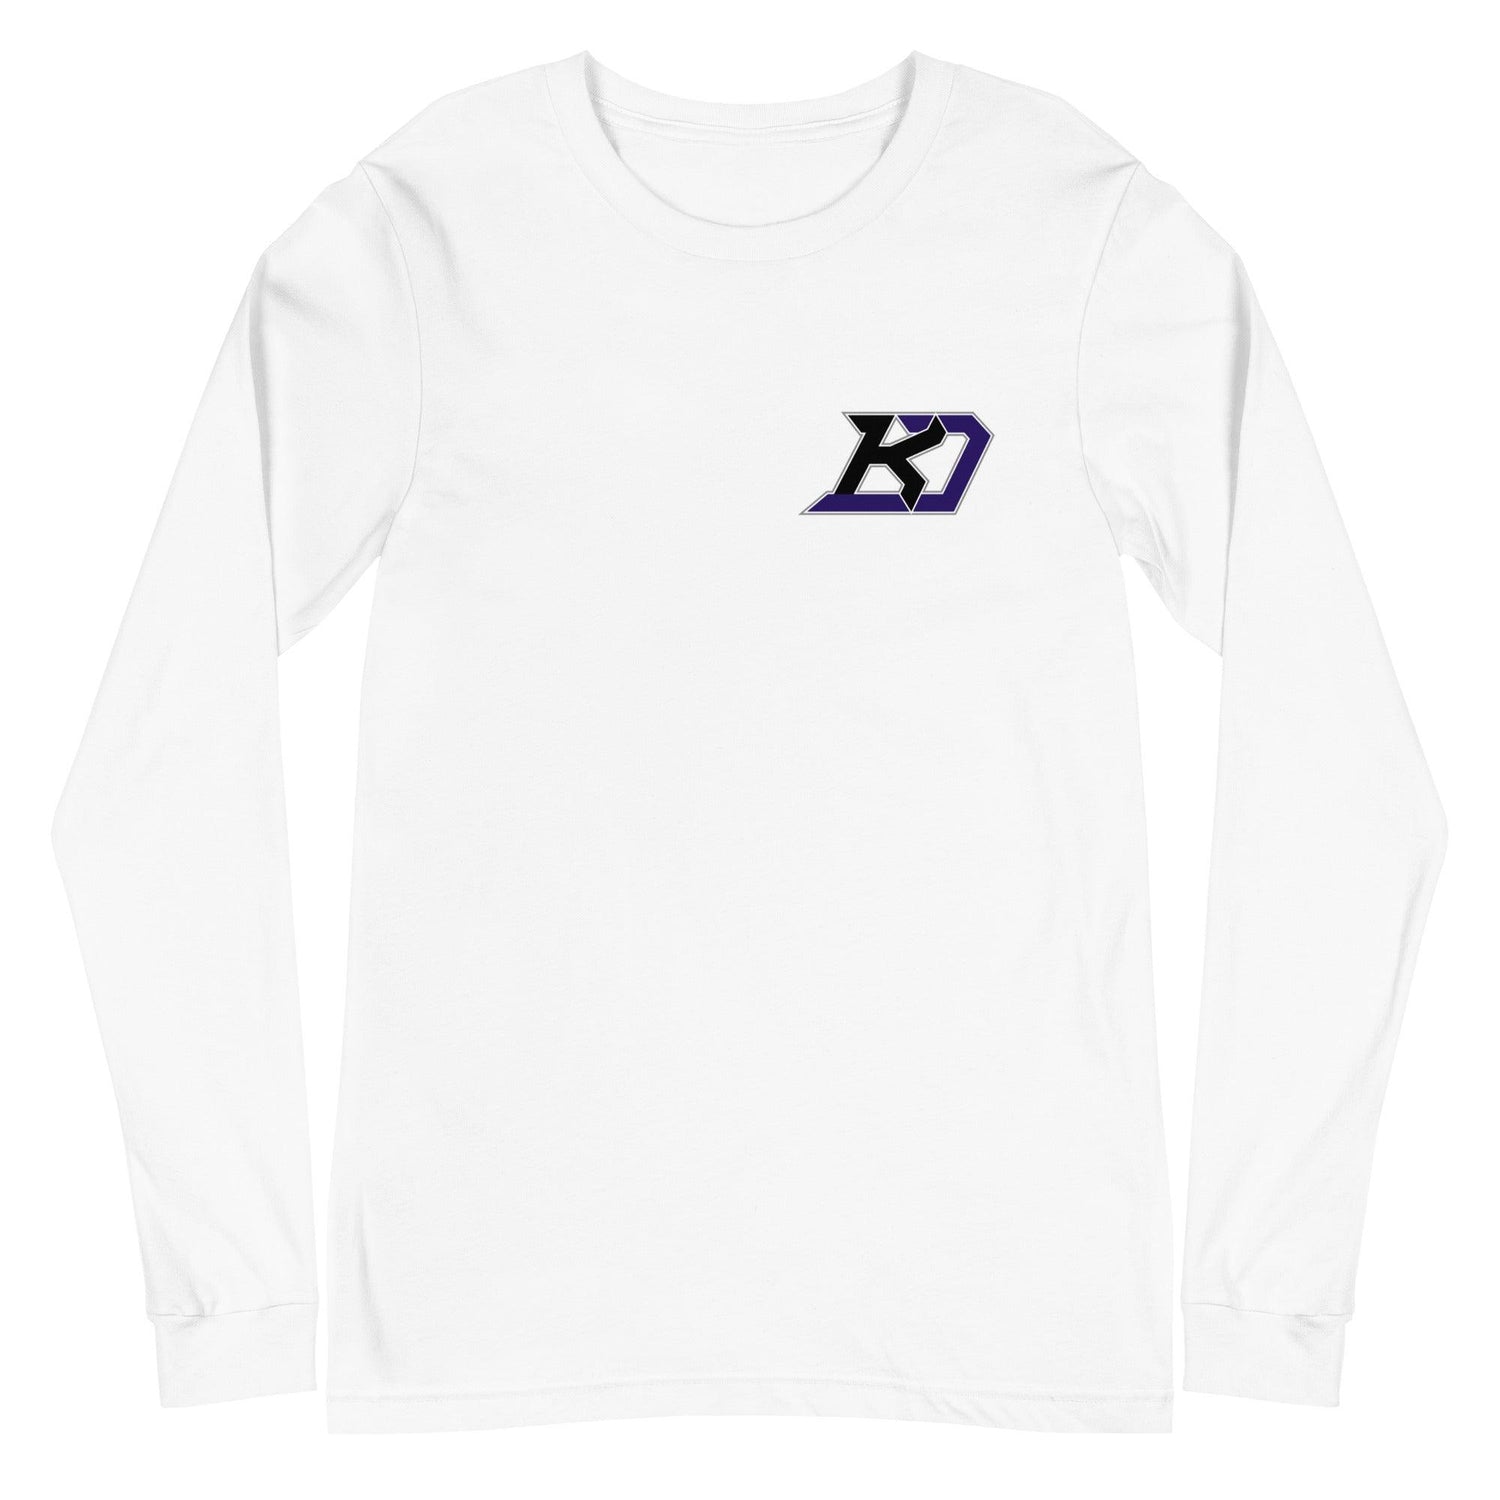 Kyle Datres “Signature” Long Sleeve Tee - Fan Arch